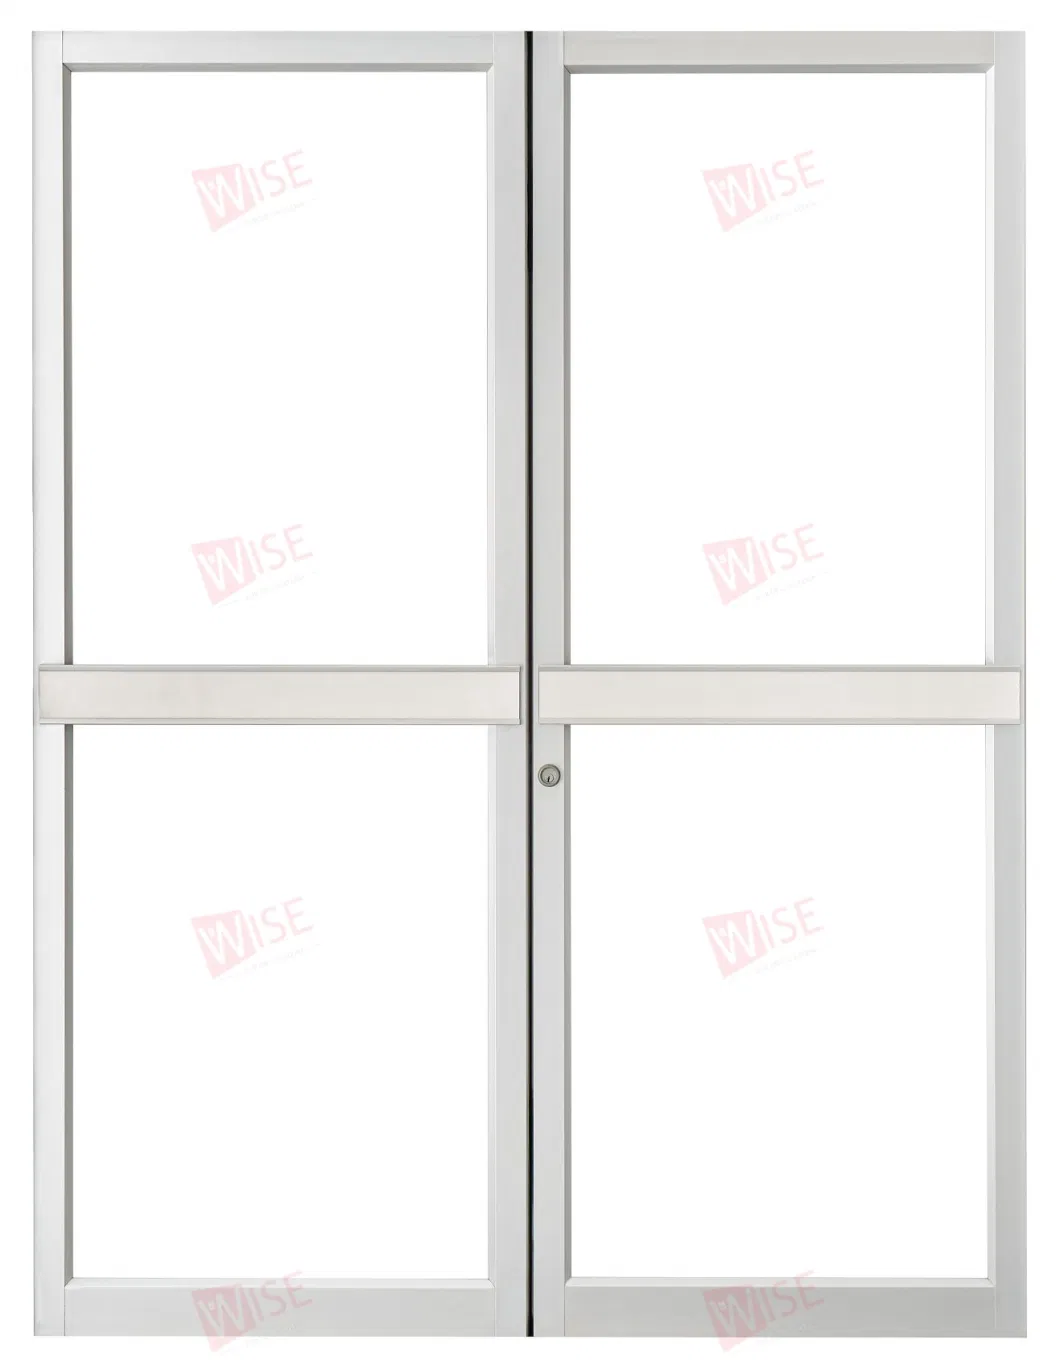 White Black Thermal Break Aluminum Doors with Glass Hinged Front Patio Exterior French Door